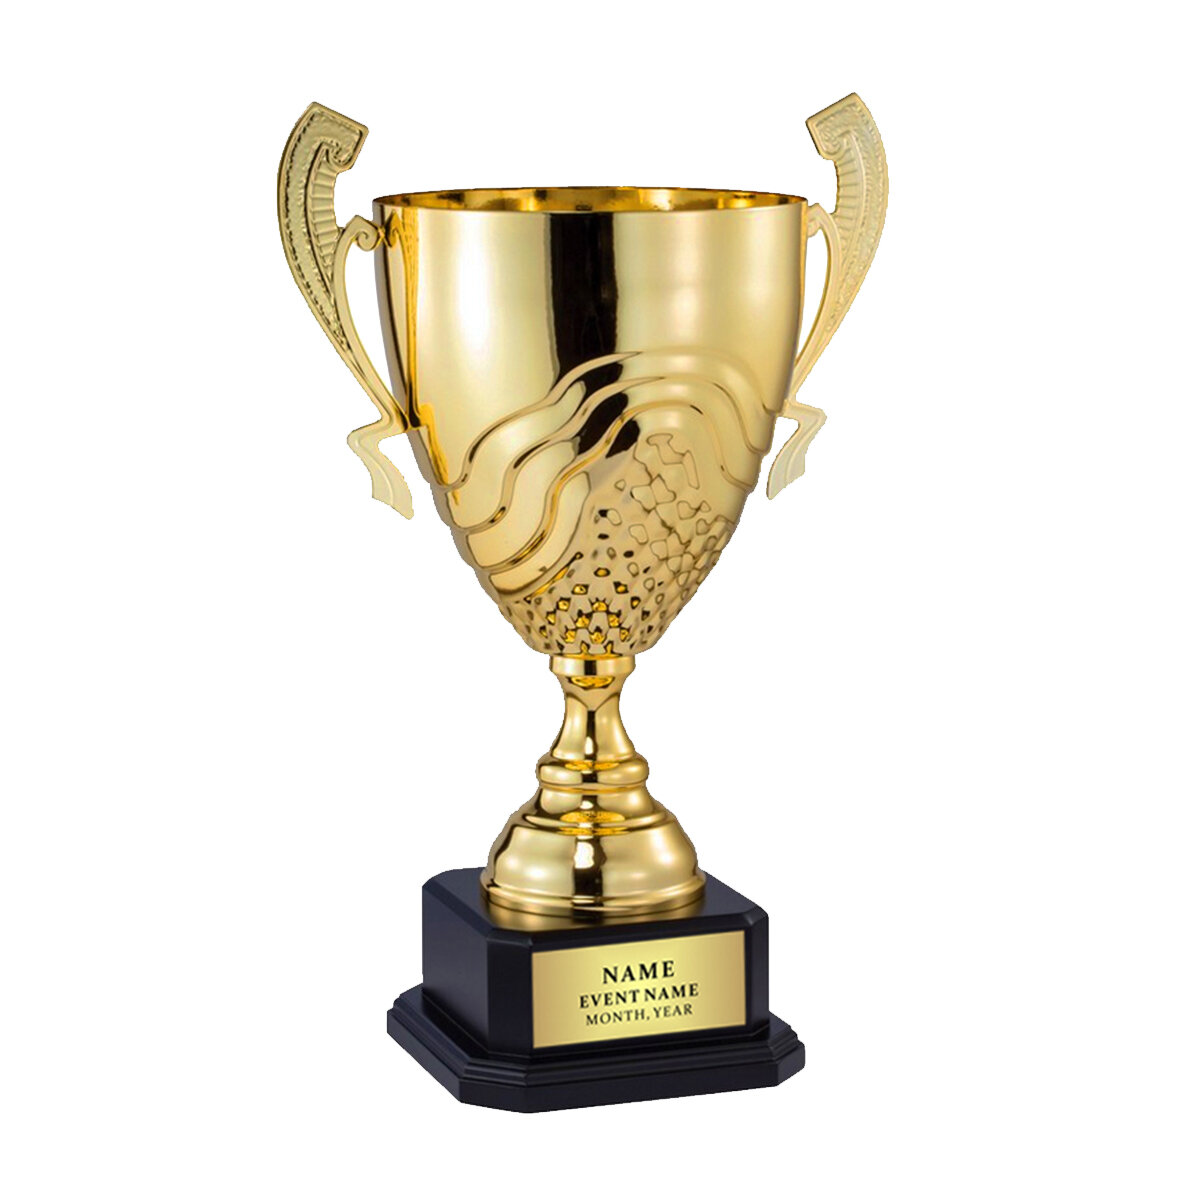 Details about   1 x WINNER SHIELD CUP NOVELTY 120mm resin trophy award 